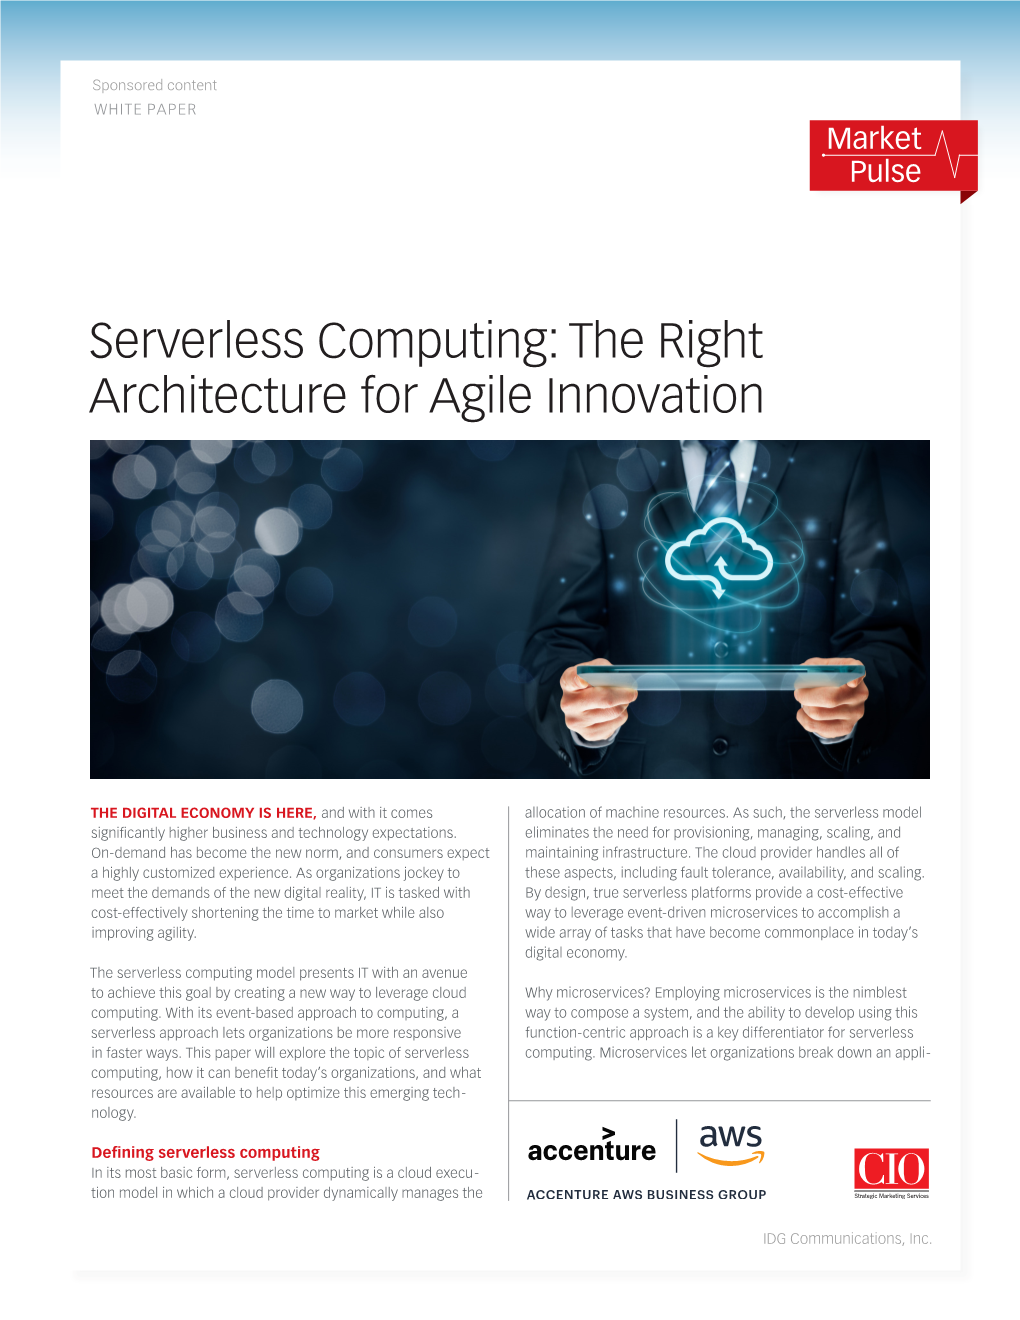 Serverless Computing: the Right Architecture for Agile Innovation